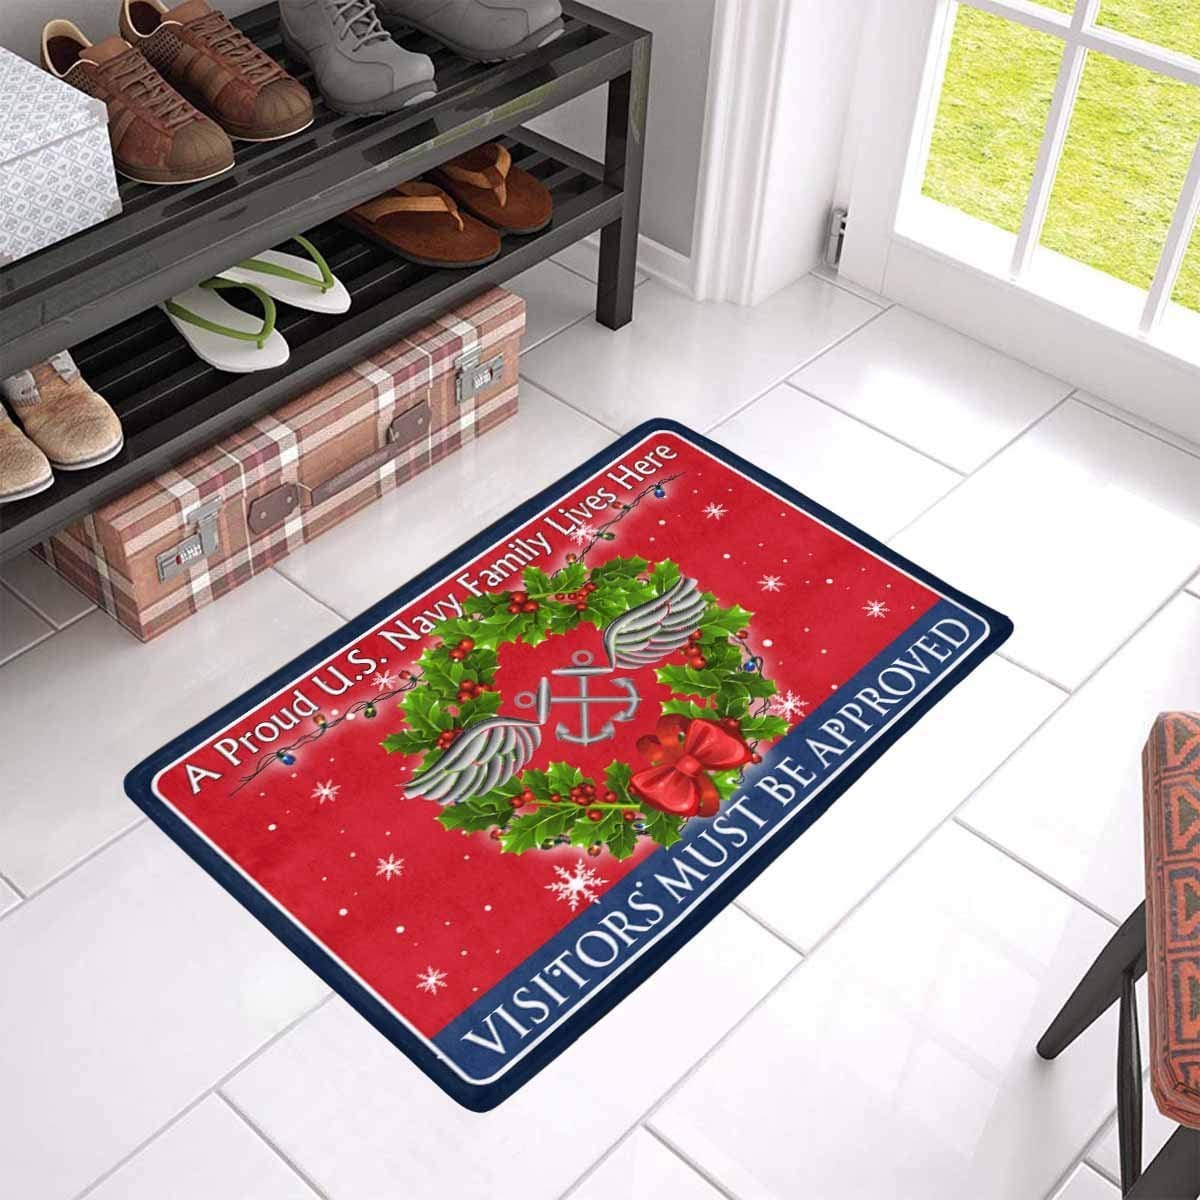 U.S Navy Aviation Boatswain's Mate Navy AB - Visitors must be approved - Christmas Doormat-Doormat-Navy-Rate-Veterans Nation